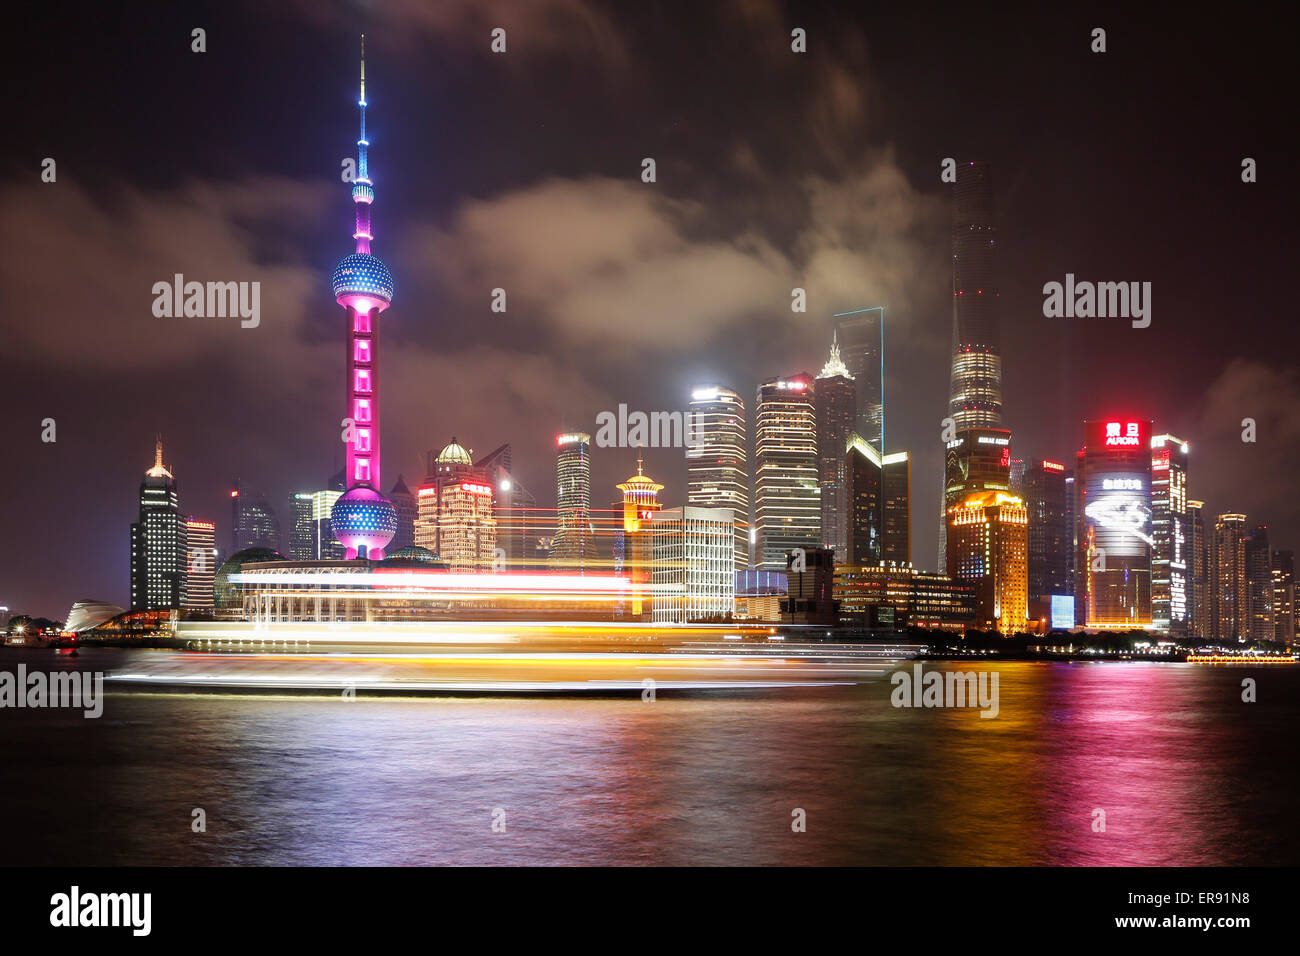 View of the Shanghai Pudong waterfront and skyline at night Stock Photo